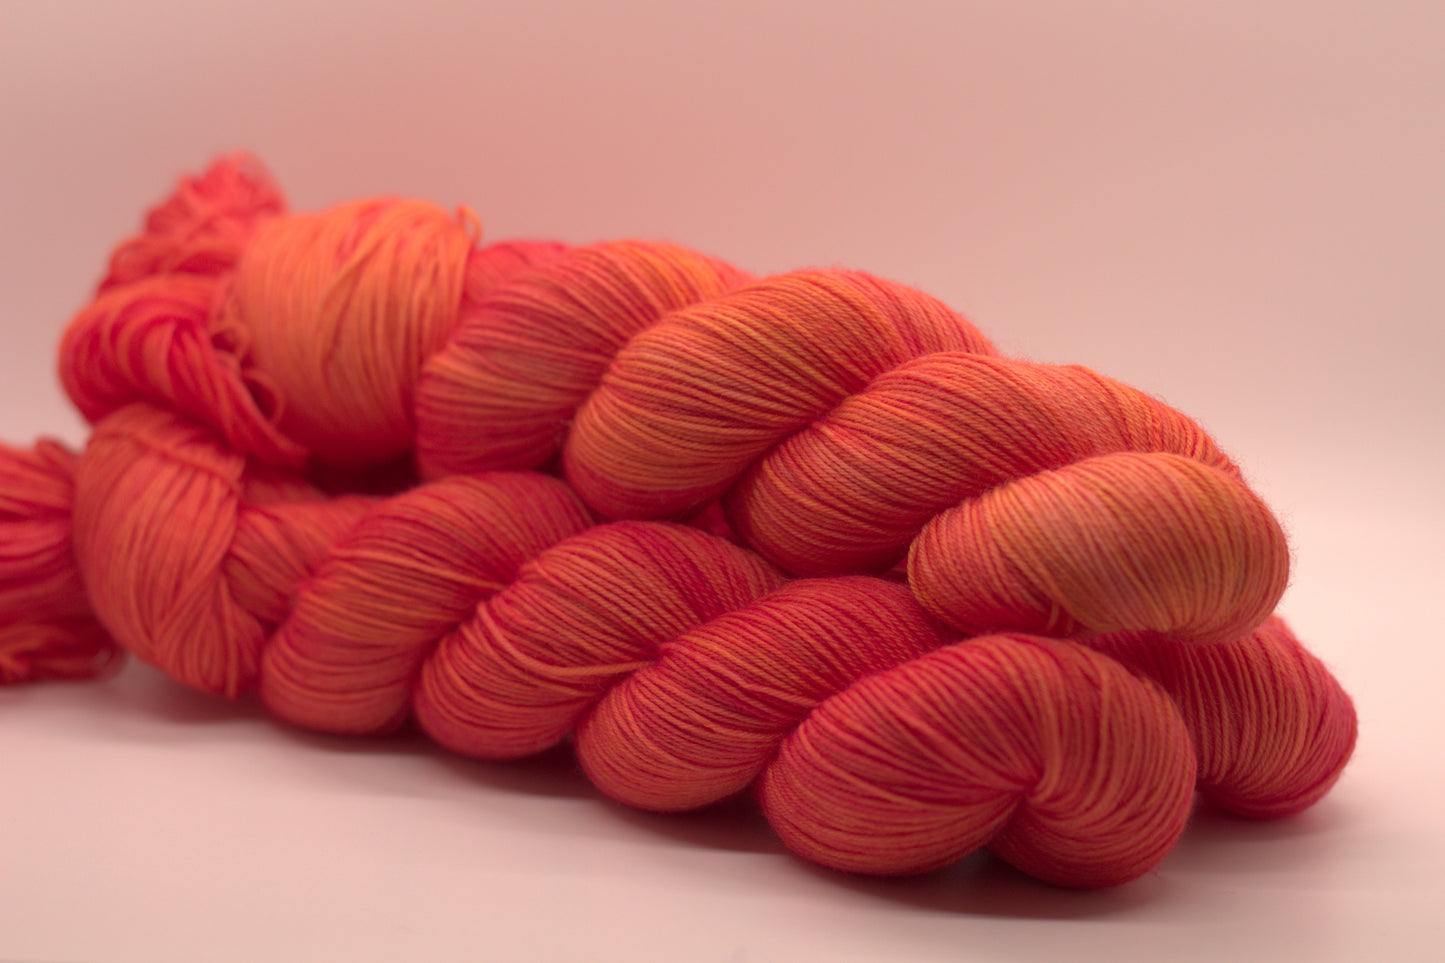 side view of three twisted skeins orange yarn with yellow undertones on white background.